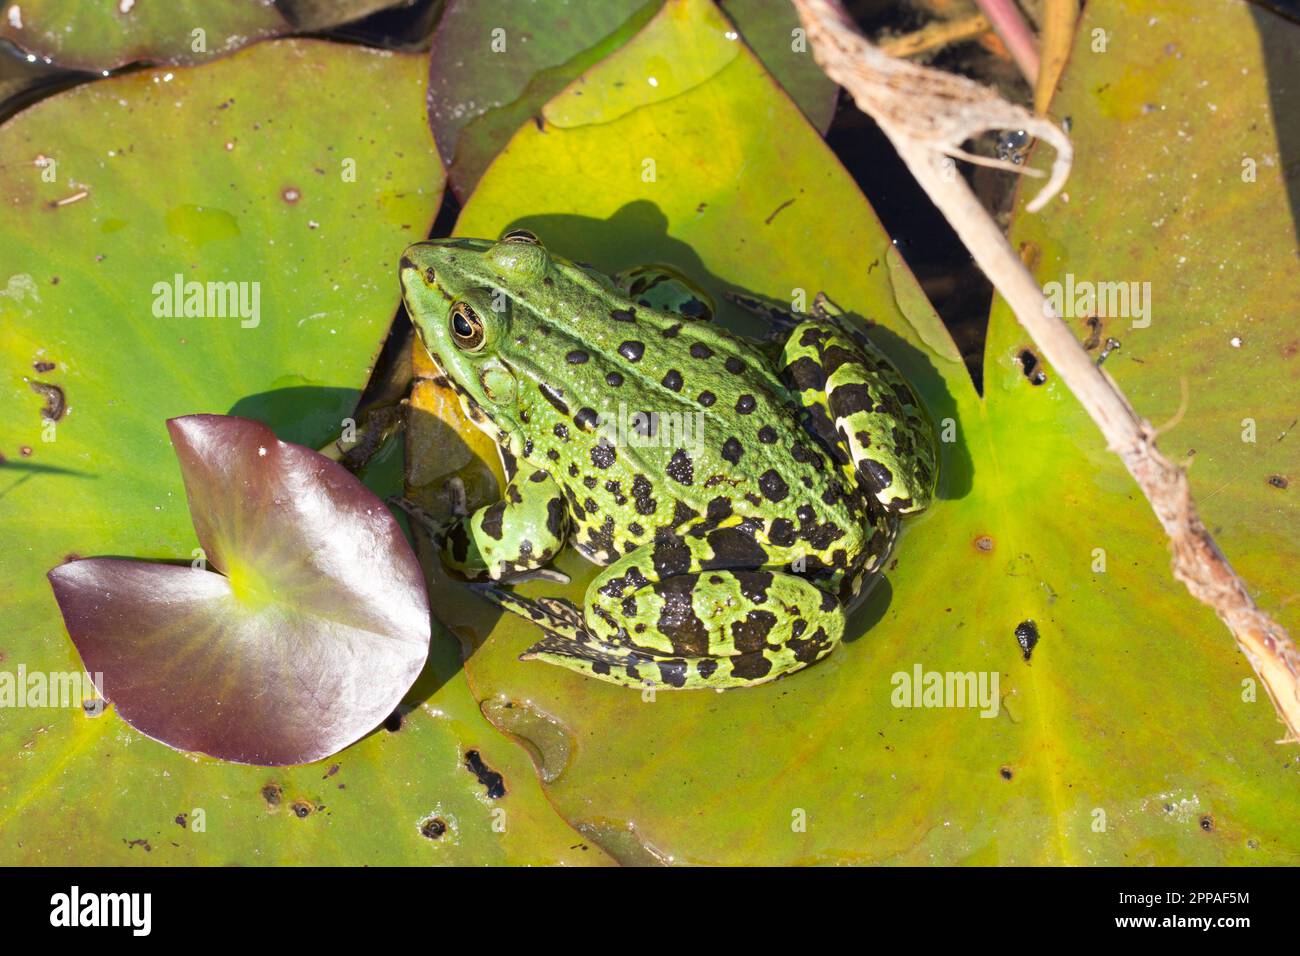 Green glass frog sitting on Lily Pad over blue water background